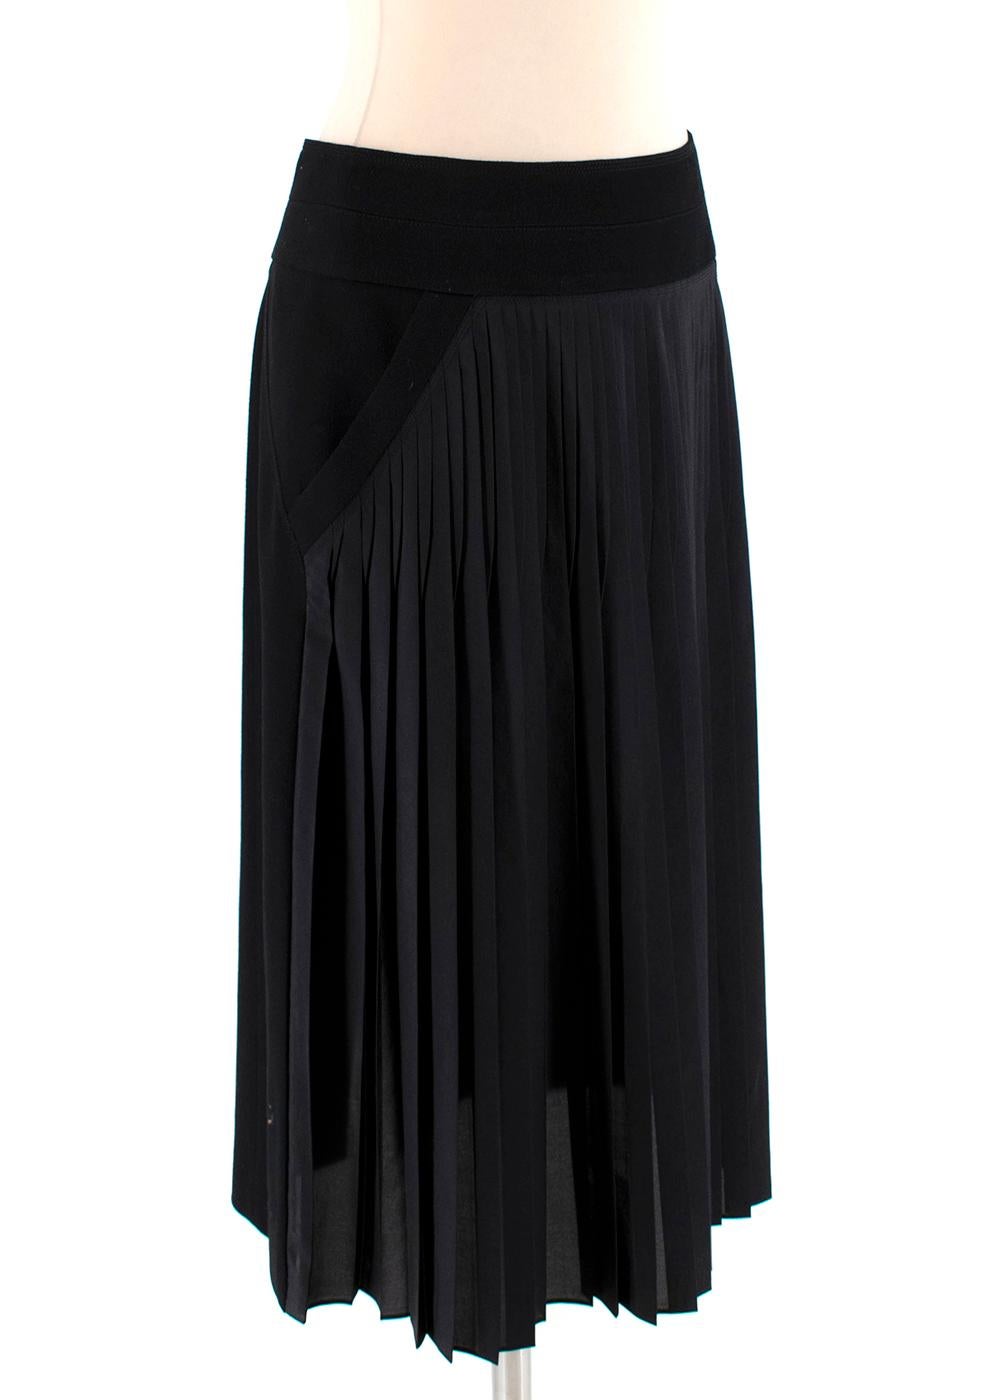 Givenchy Black Silk Blend Pleated Midi Skirt

-Made of a soft lightweight silk blend fabric to the front, wool to the back 
-Luxurious full silk lining 
-Beautiful pleated texture 
-2 pockets to the front 
-Slit to the back 
-Zip fastening to the